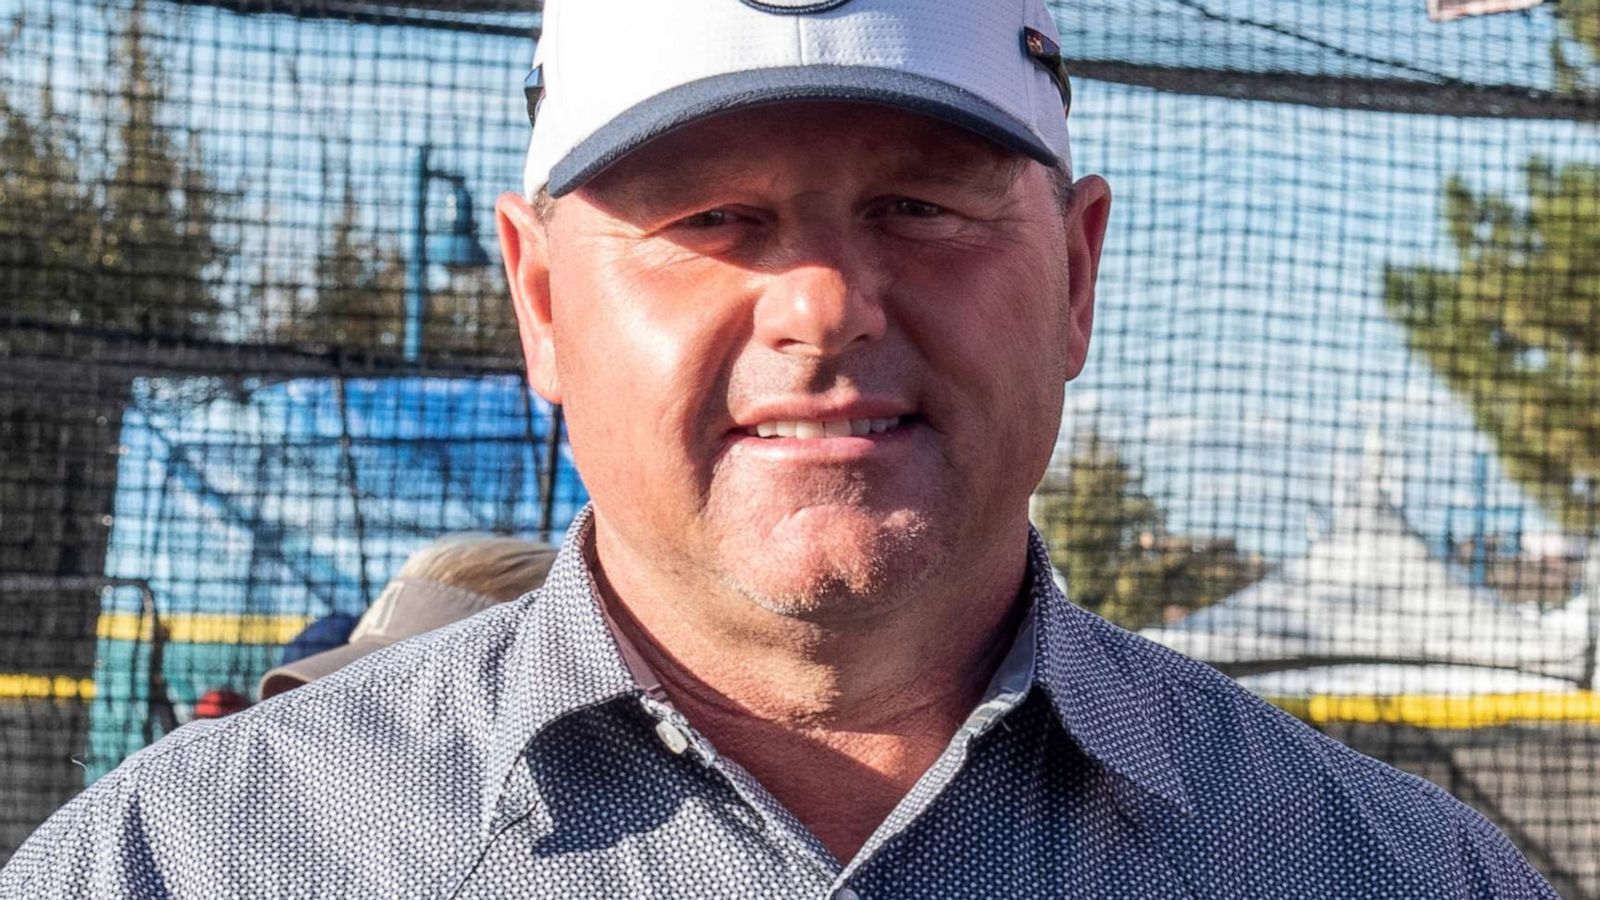 Roger Clemens responds after not being elected to Baseball Hall of Fame